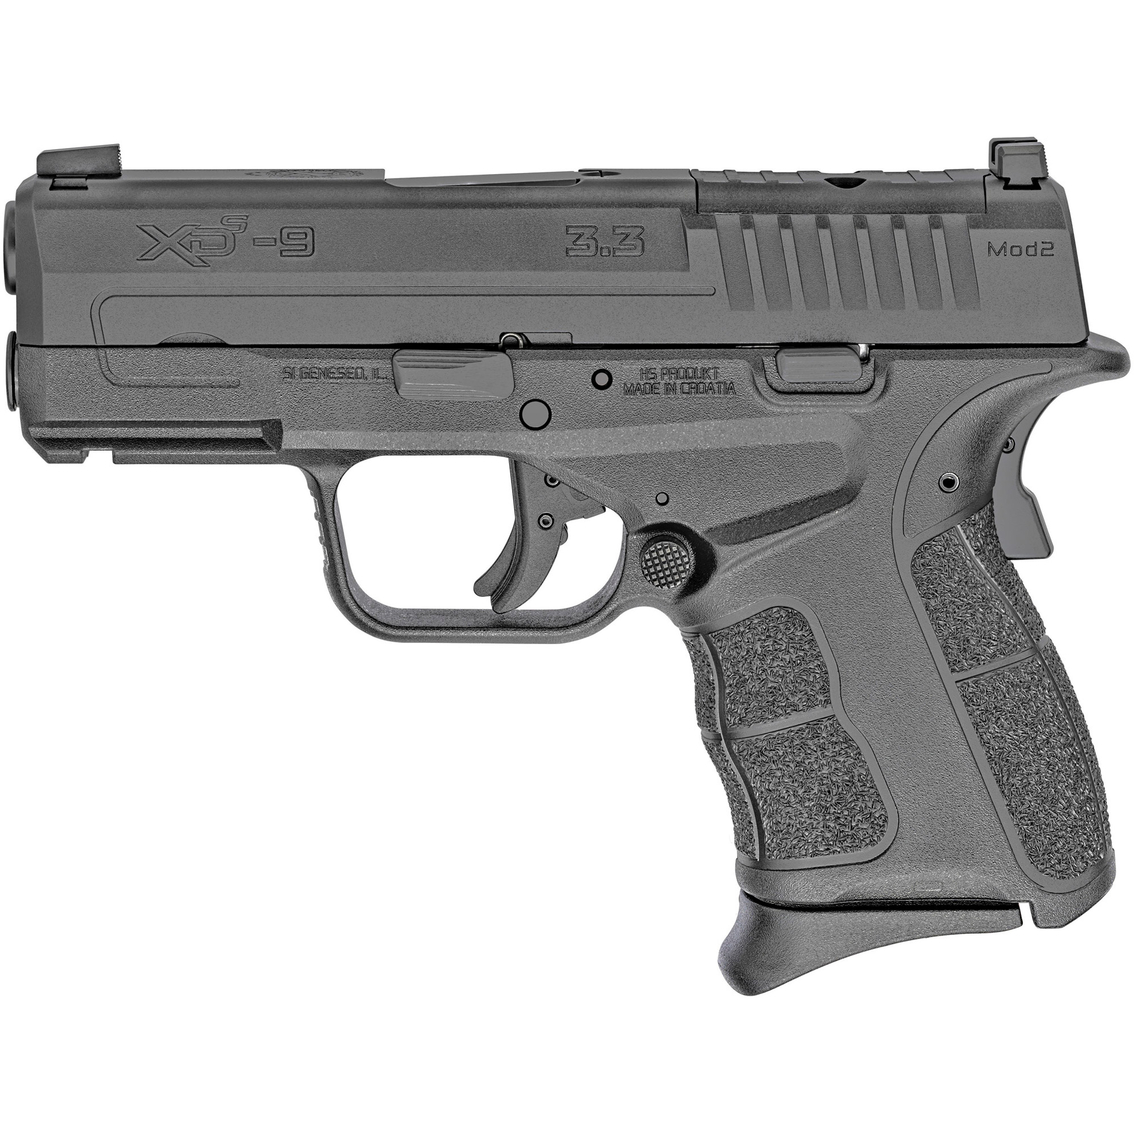 Springfield Armory XDS-Mod 2 OSP 9mm 3.3 in. Barrel Optic Ready 9 Rnd Pistol Black - Image 2 of 3